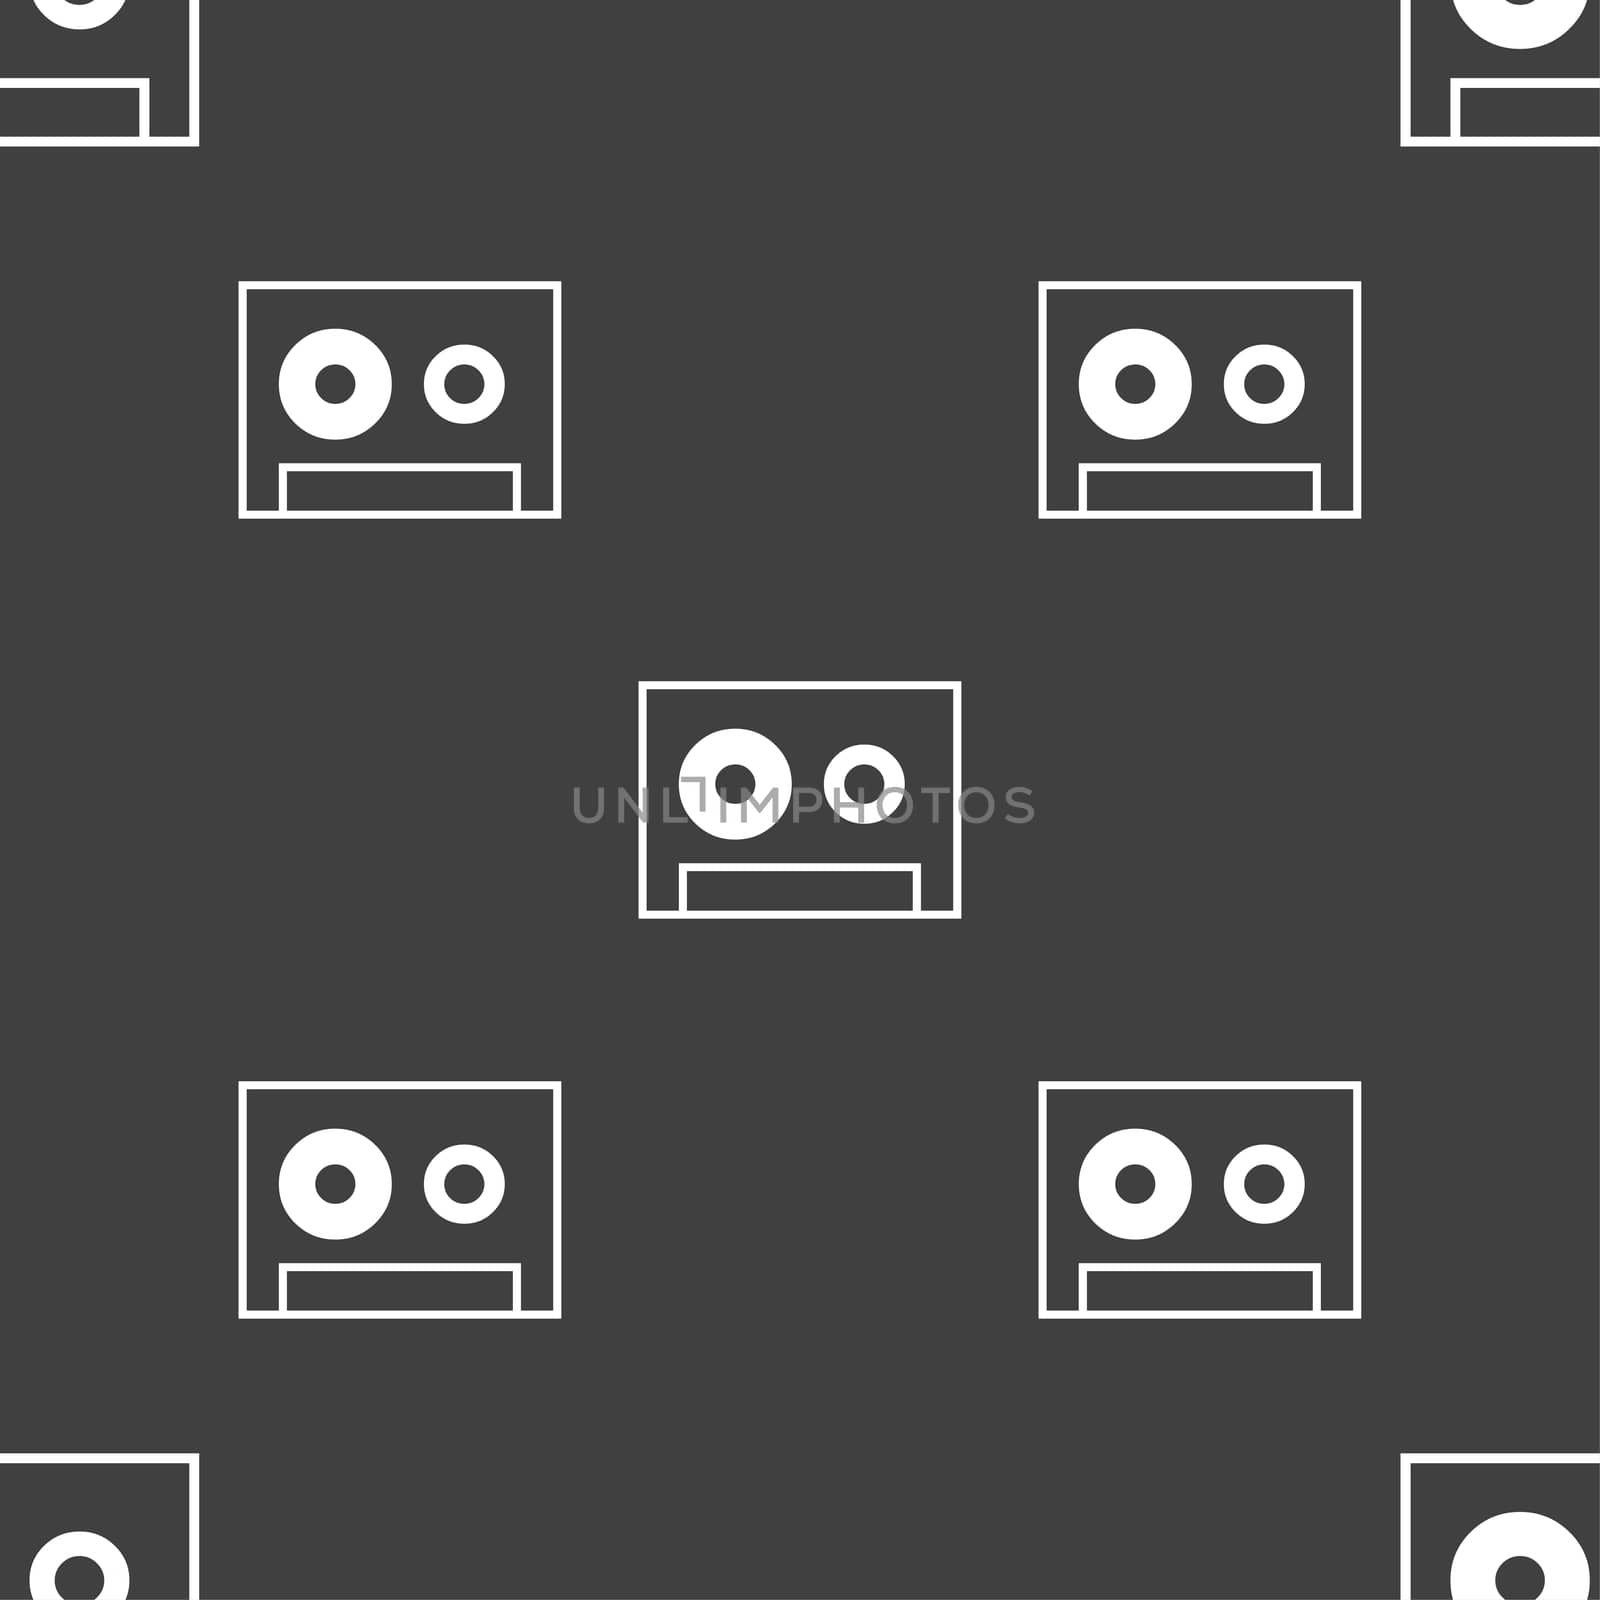 cassette sign icon. Audiocassette symbol. Seamless pattern on a gray background. illustration